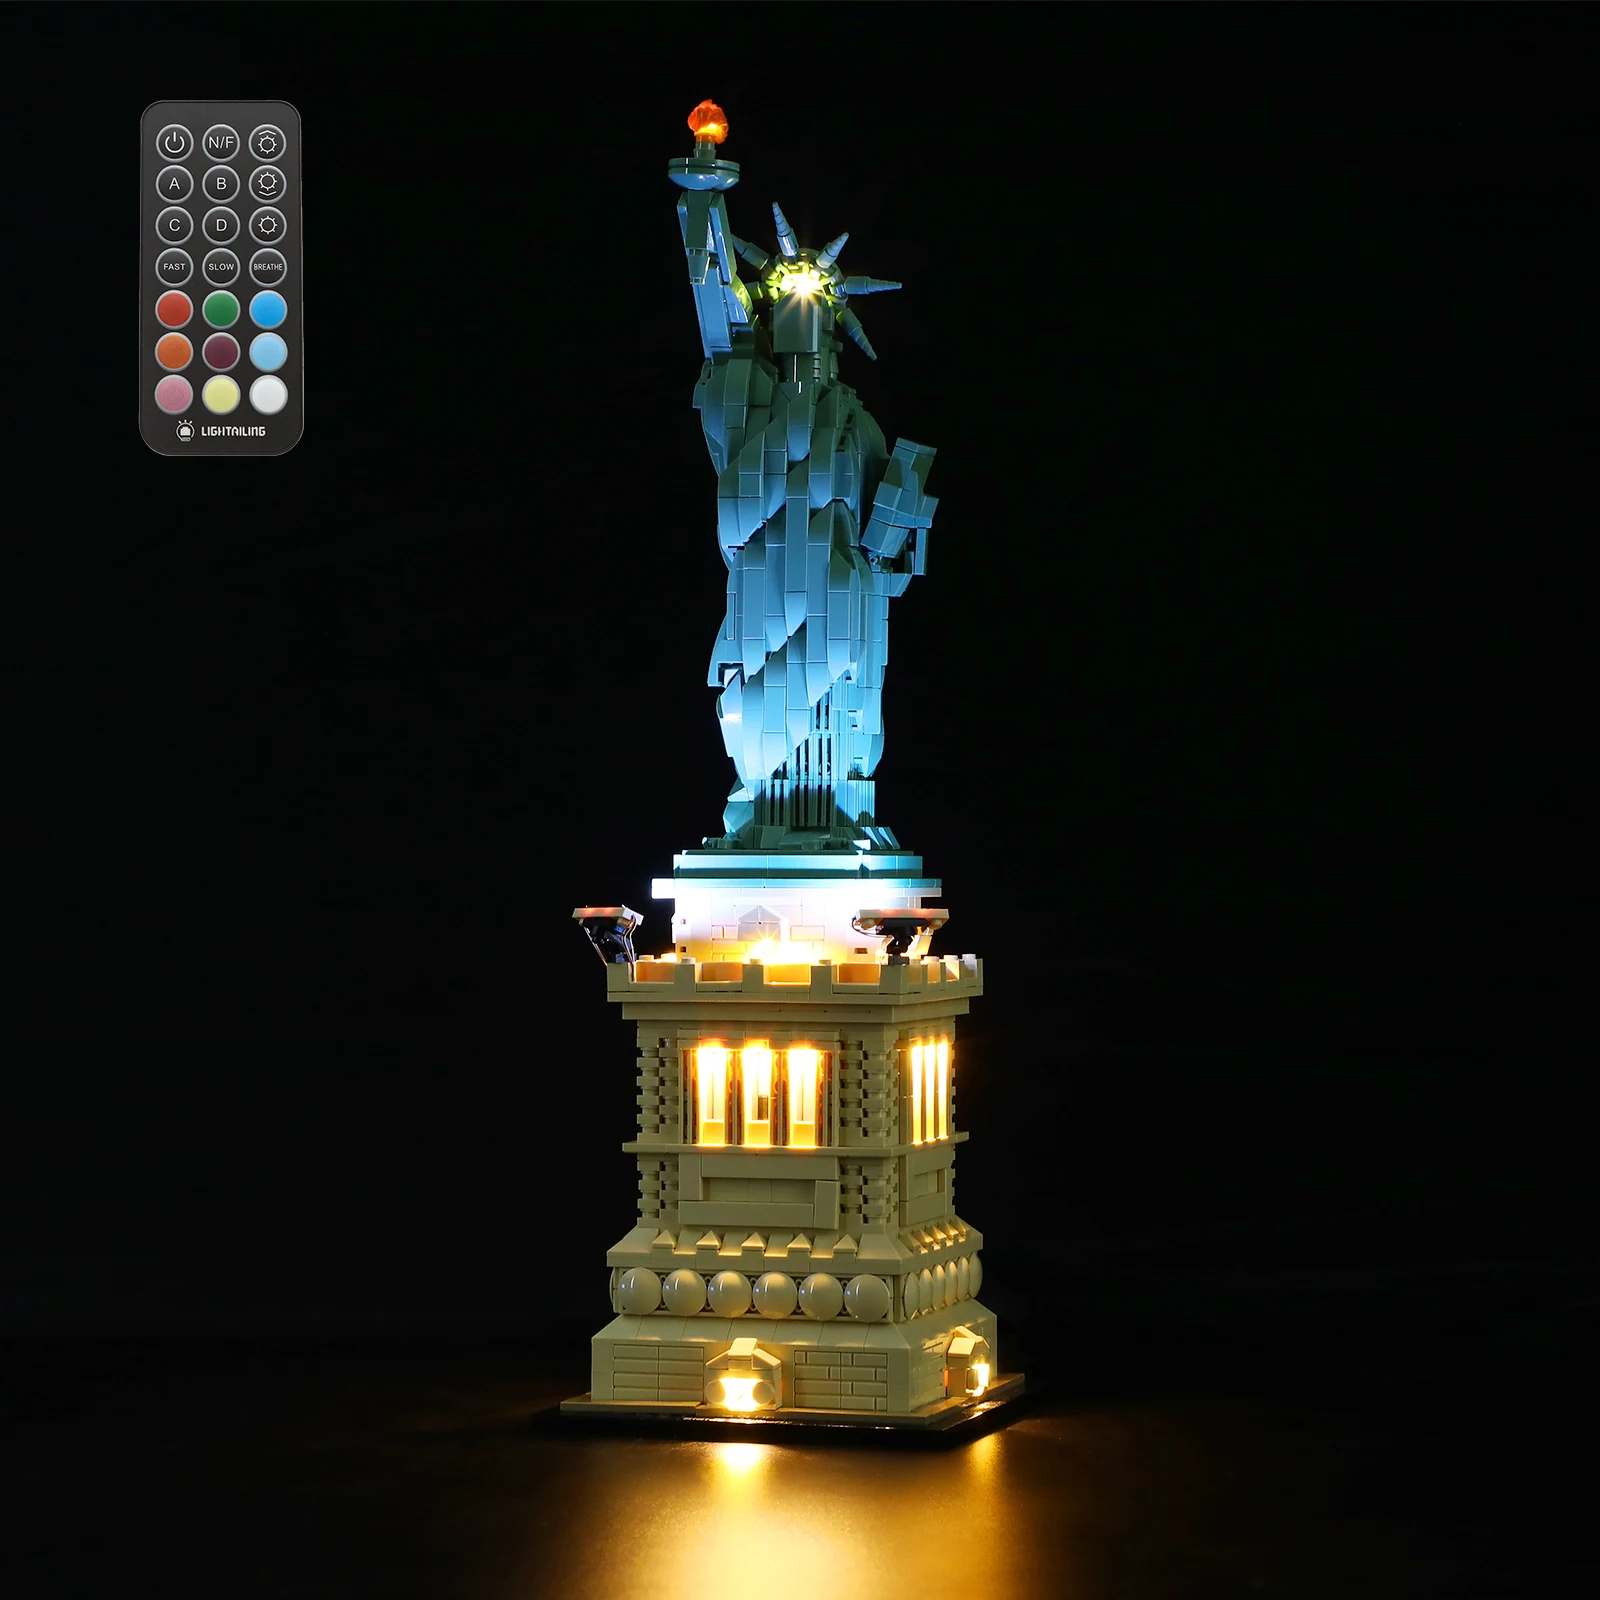 

JOY MAGS Only Led Light Kit for 21042 Statue of Liberty Building Blocks Set (NOT Include the Model) Bricks Toys RC Version